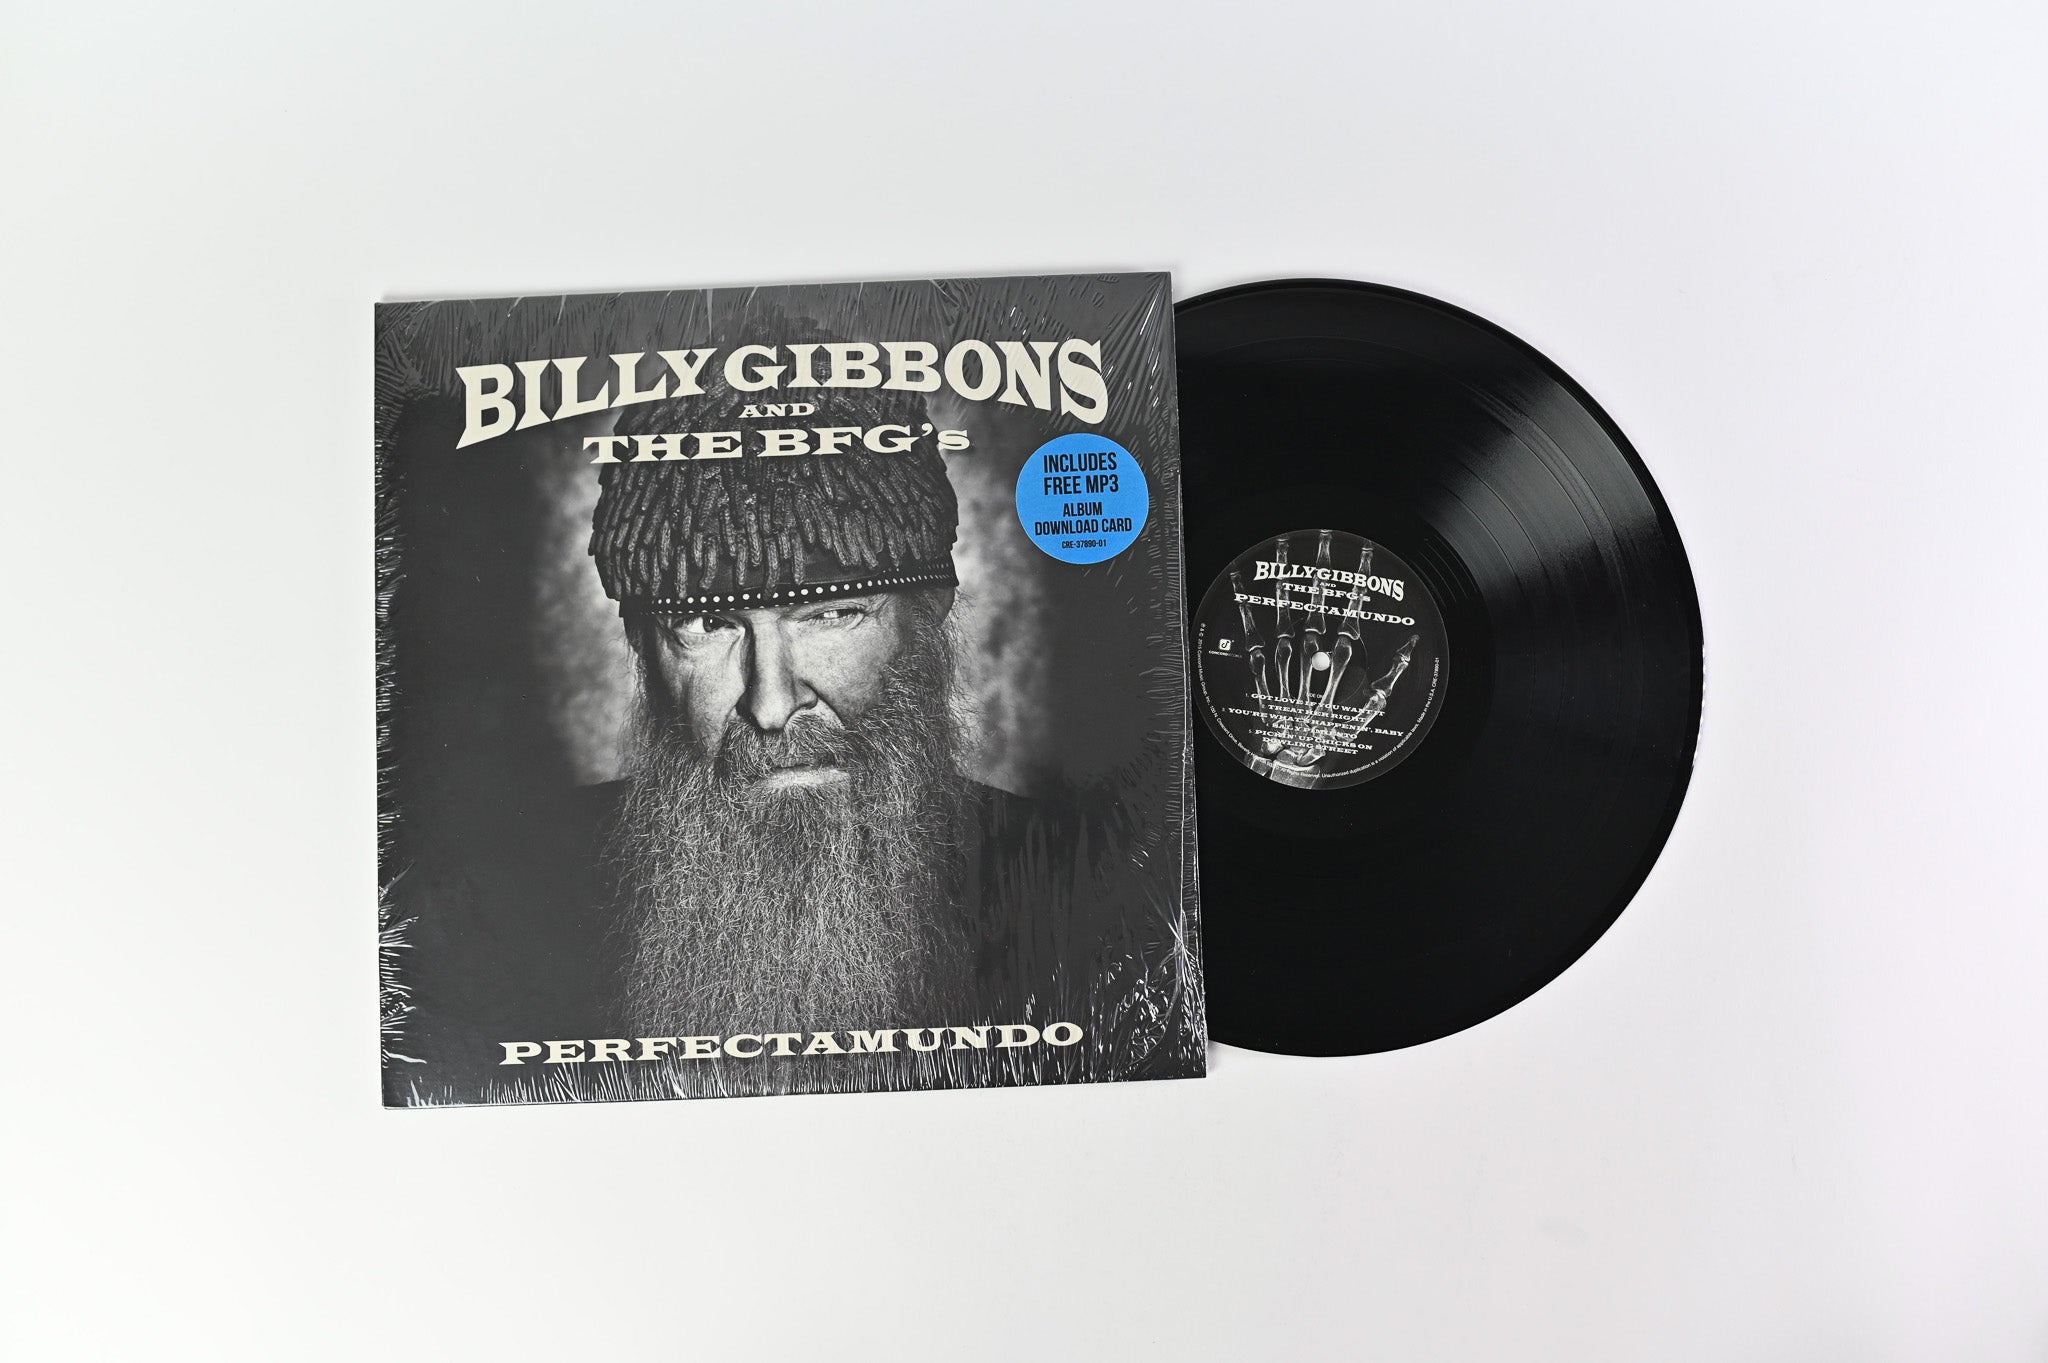 Billy Gibbons and The BFG's - Perfectamundo on Concord Records